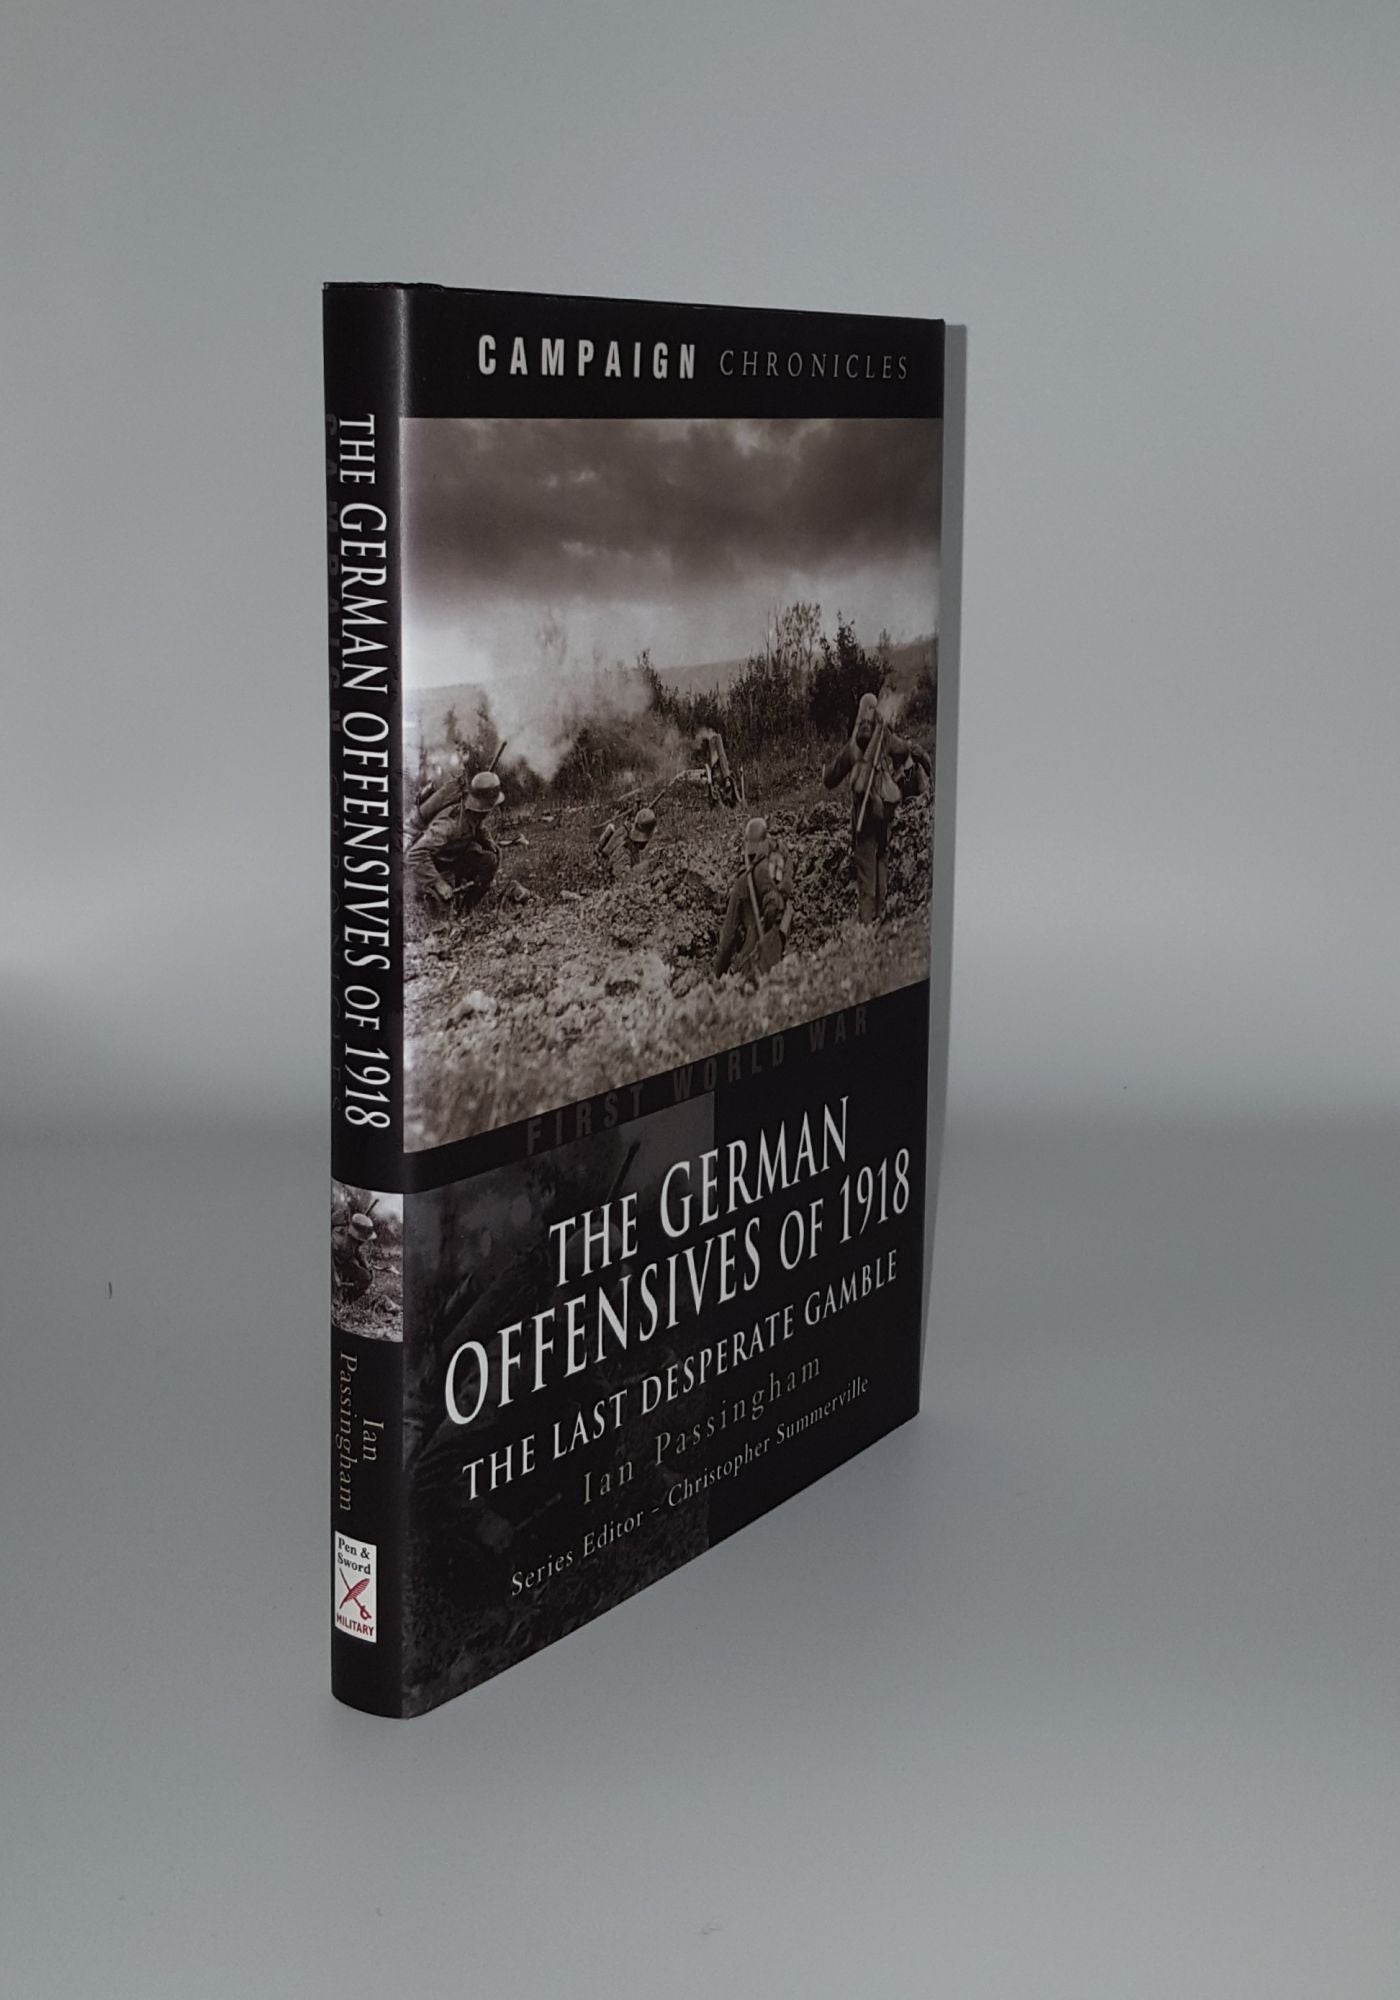 PASSINGHAM Ian - The German Offensives of 1918 the Last Desperate Gamble